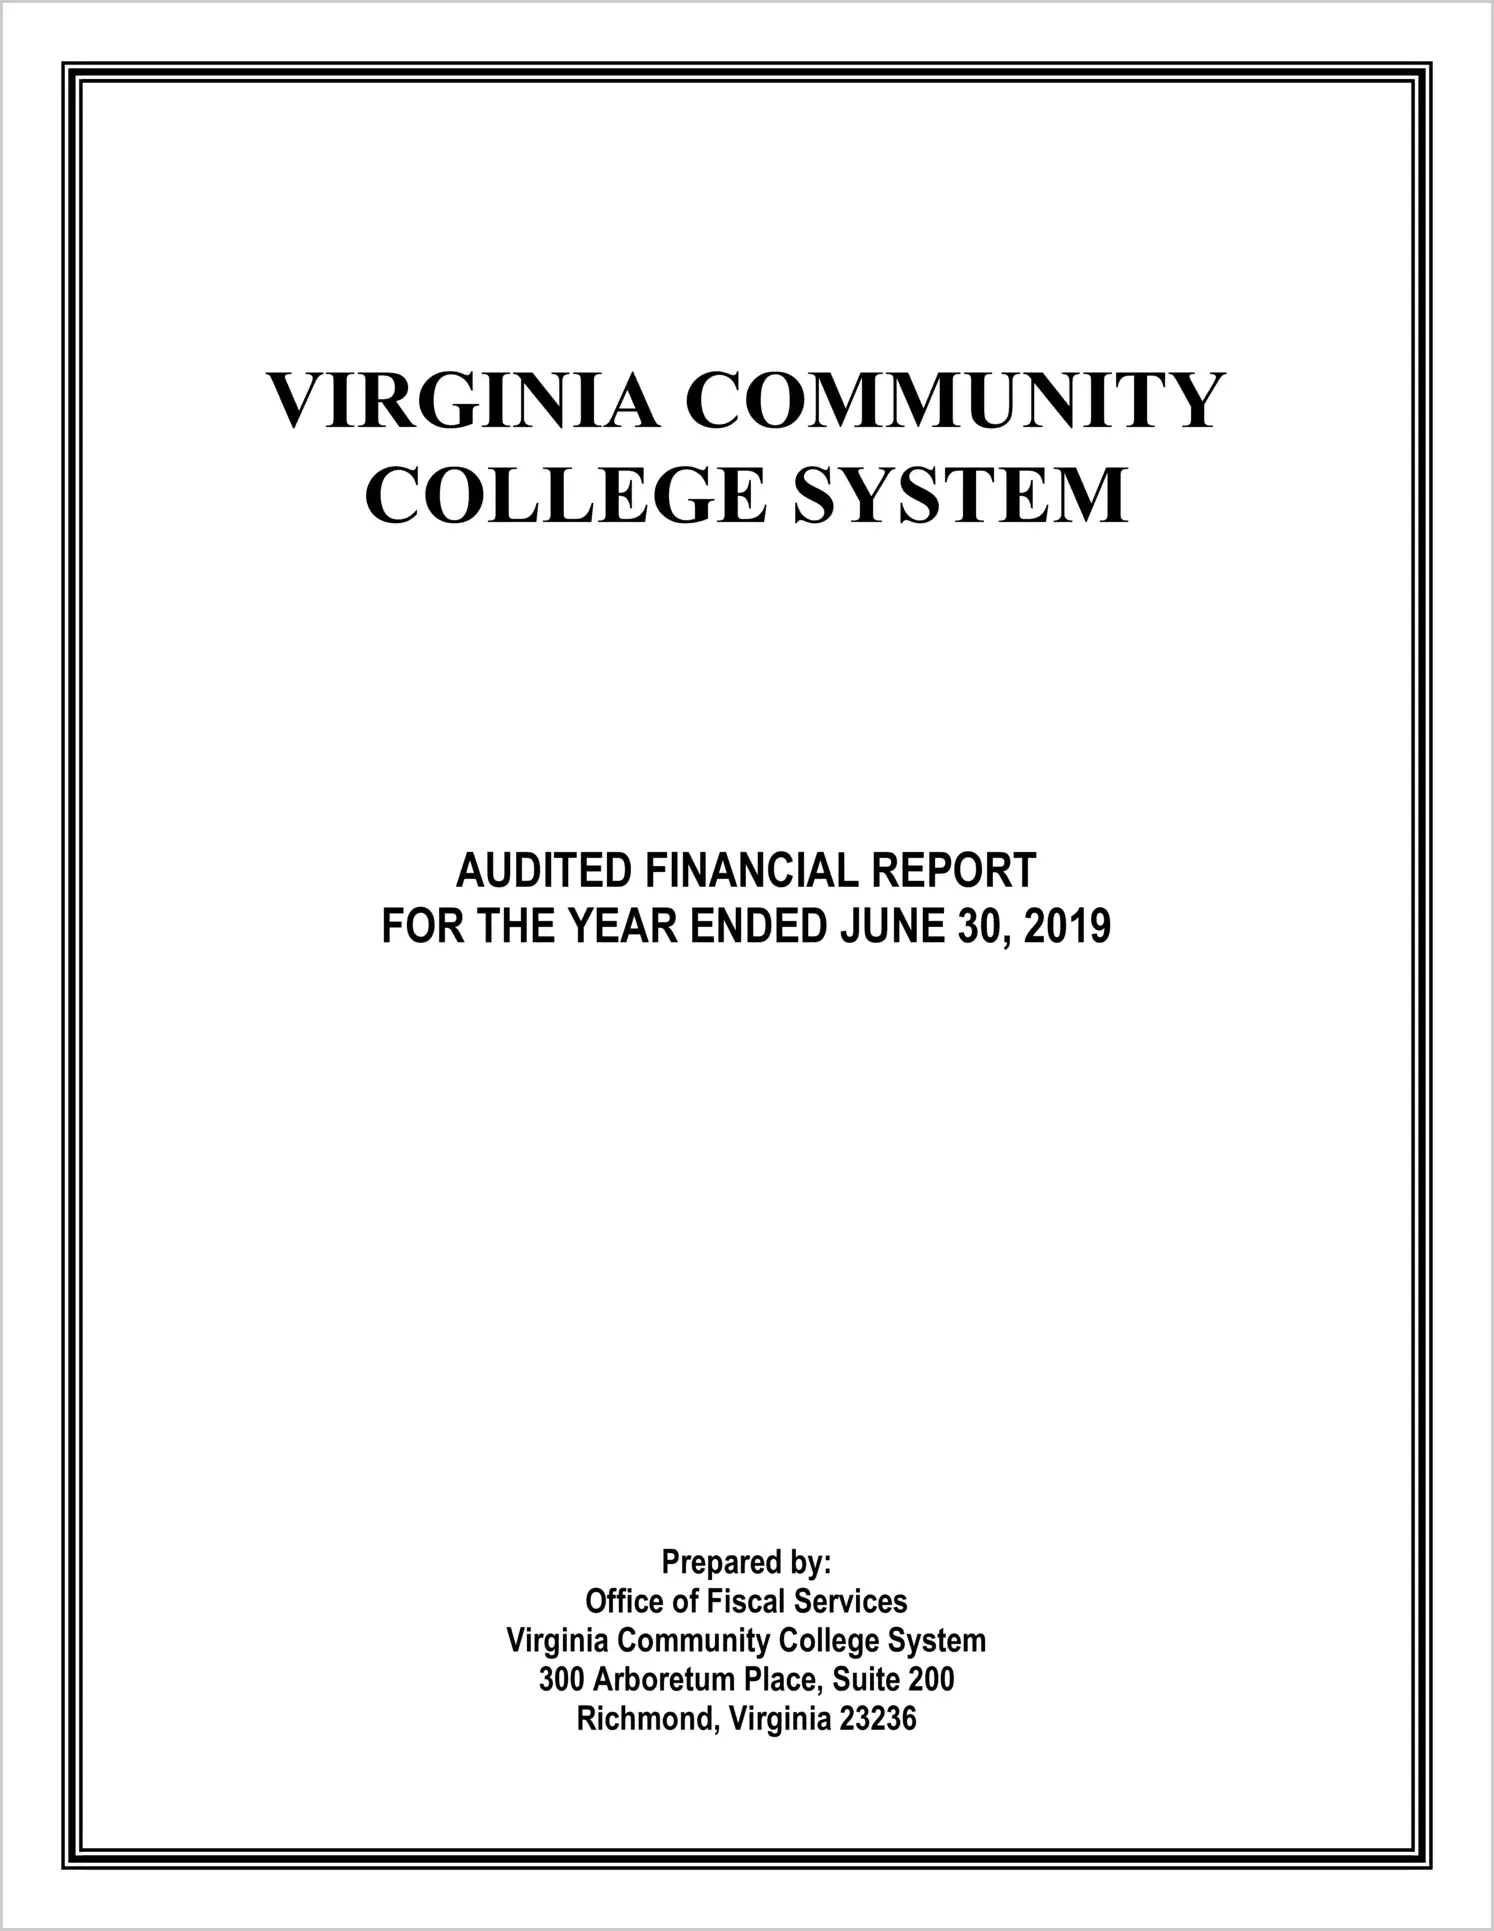 Virginia Community College System Financial Statements for the year ended June 30, 2019